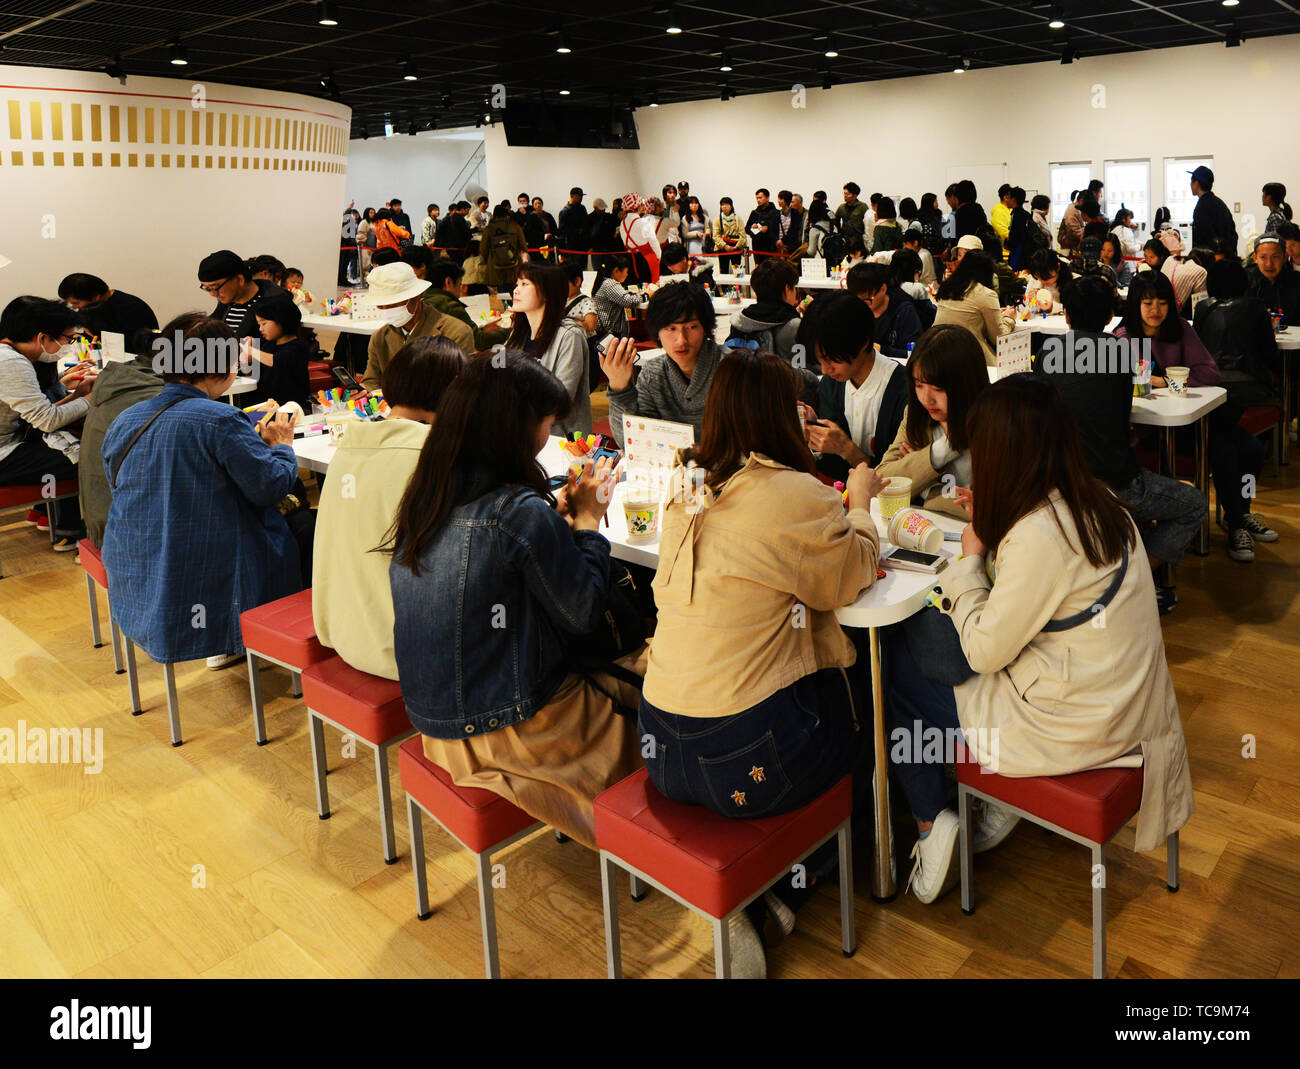 Il Cup Noodle workshop presso il Cup Noodles museum di Osaka in Giappone. Foto Stock